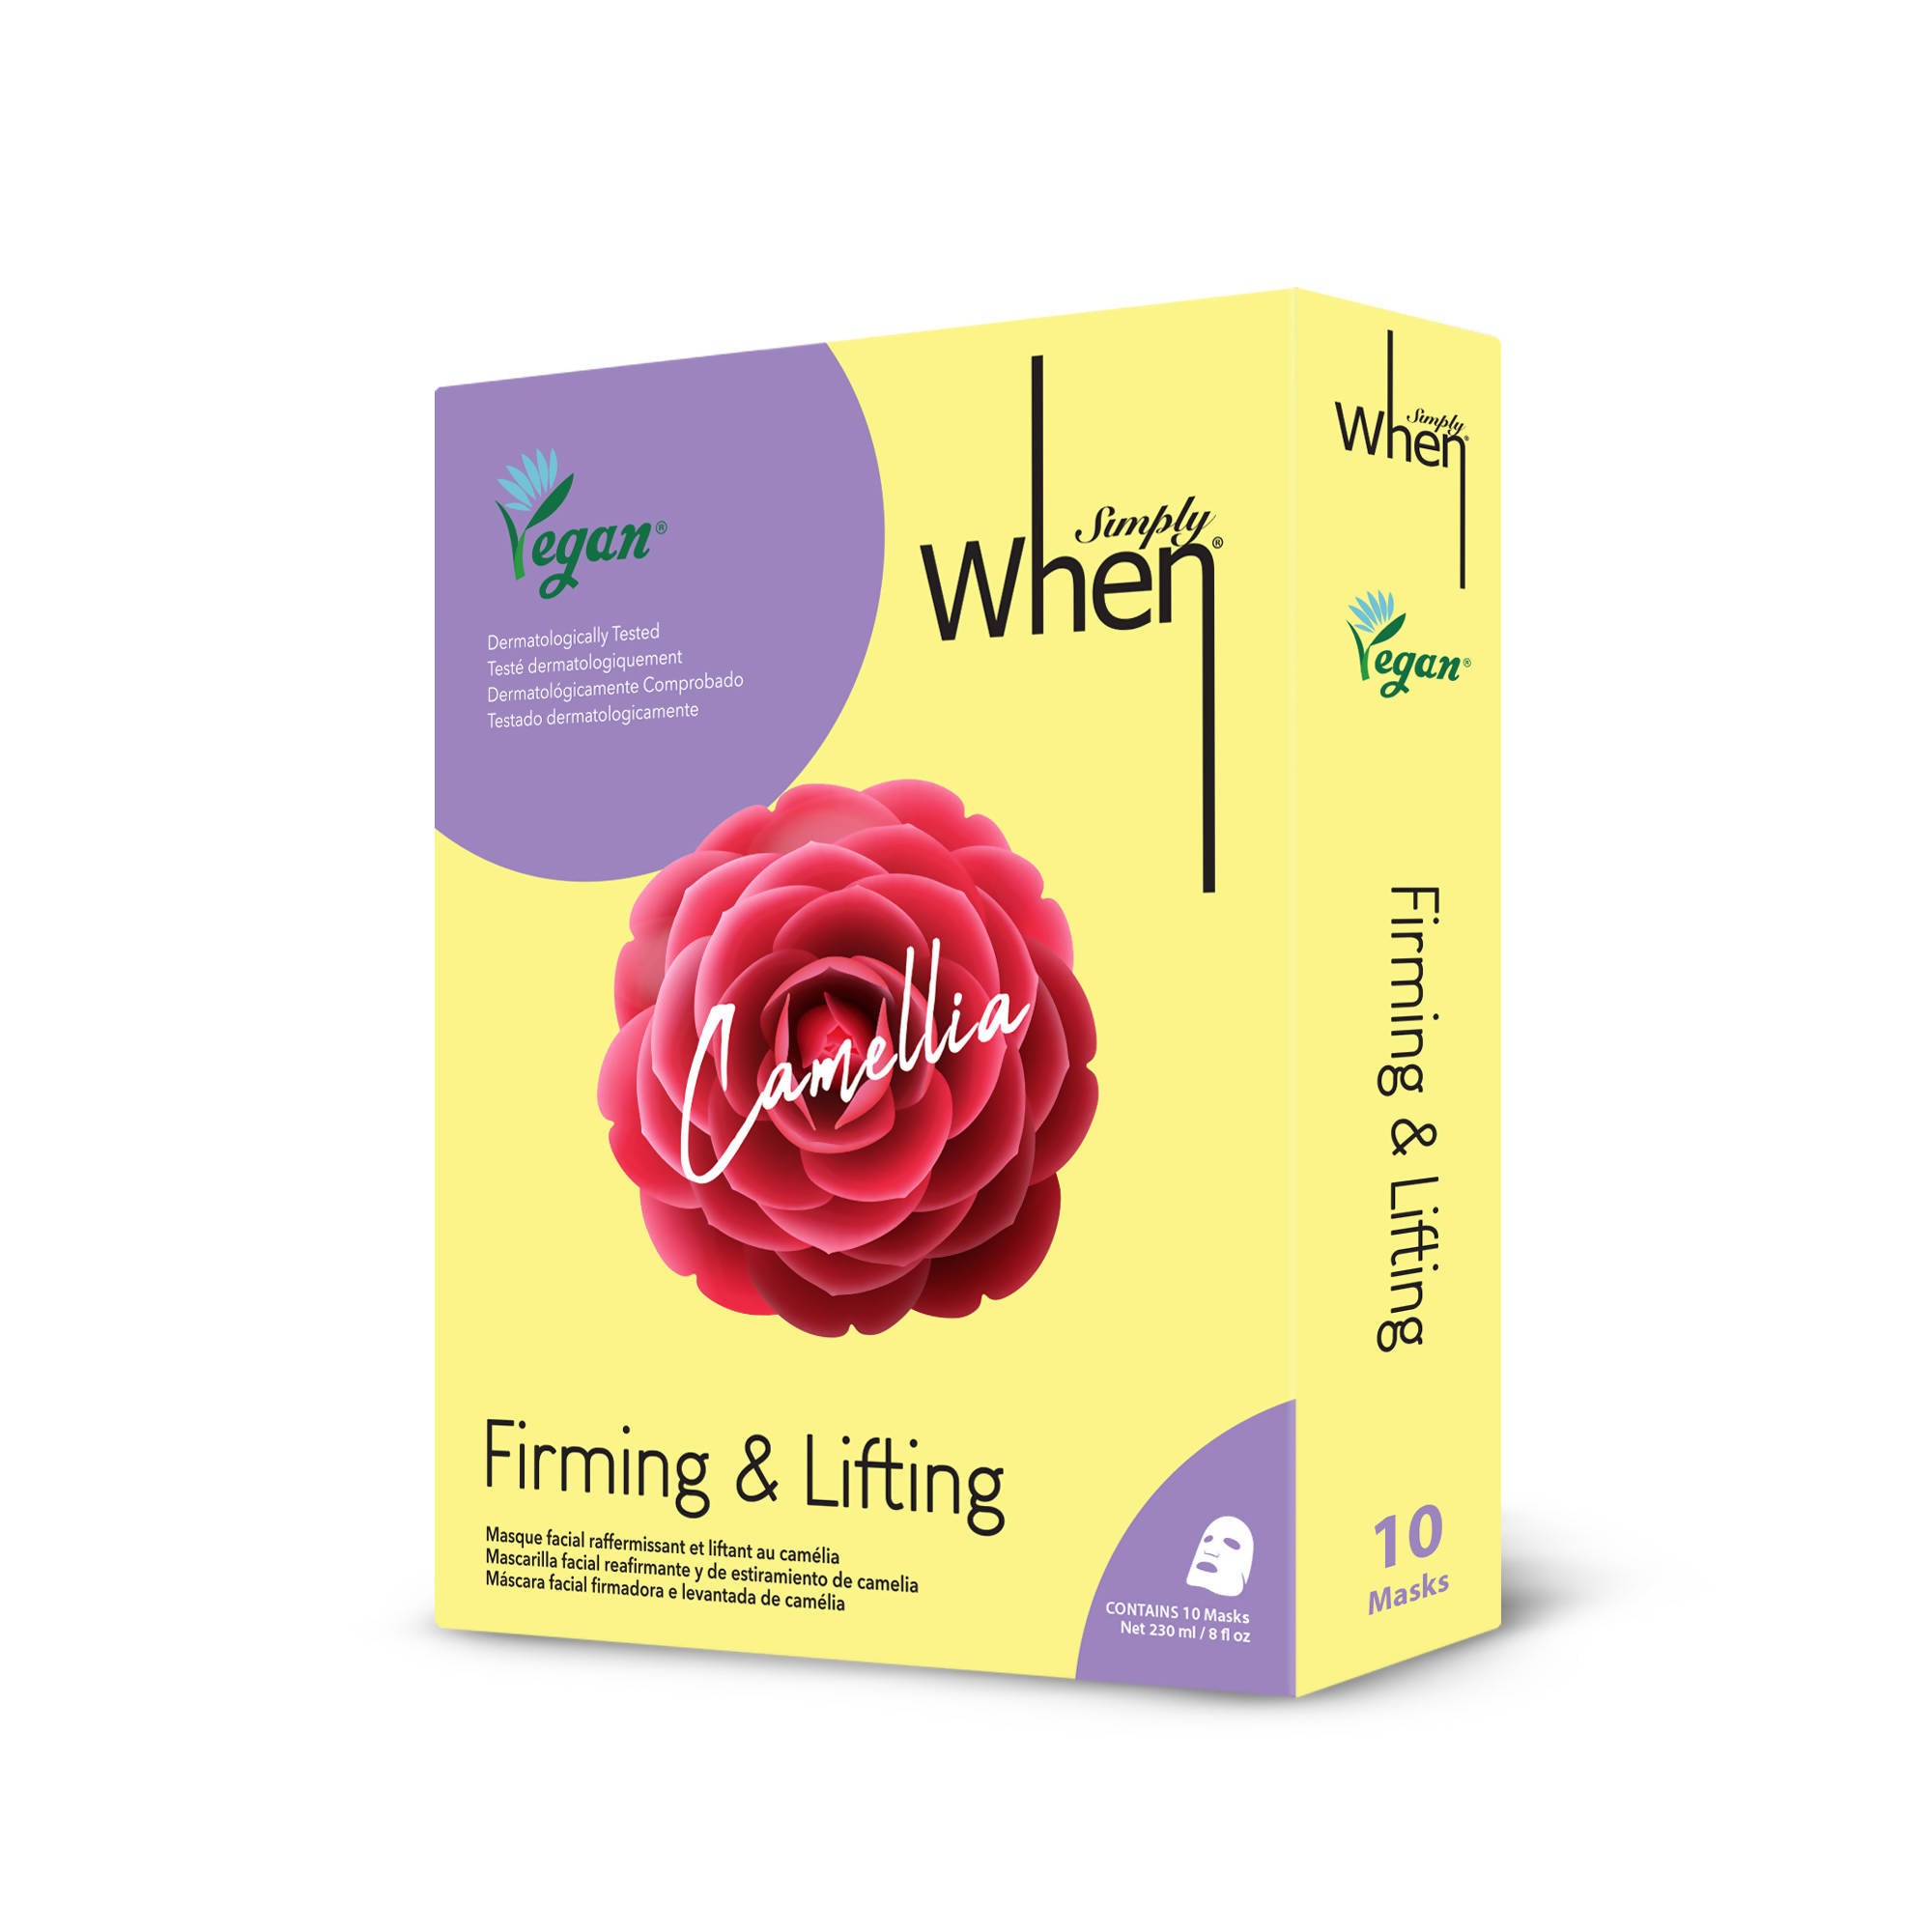 [Simply When Vegan] Camellia Firming & Lifting Mask (10 pack)